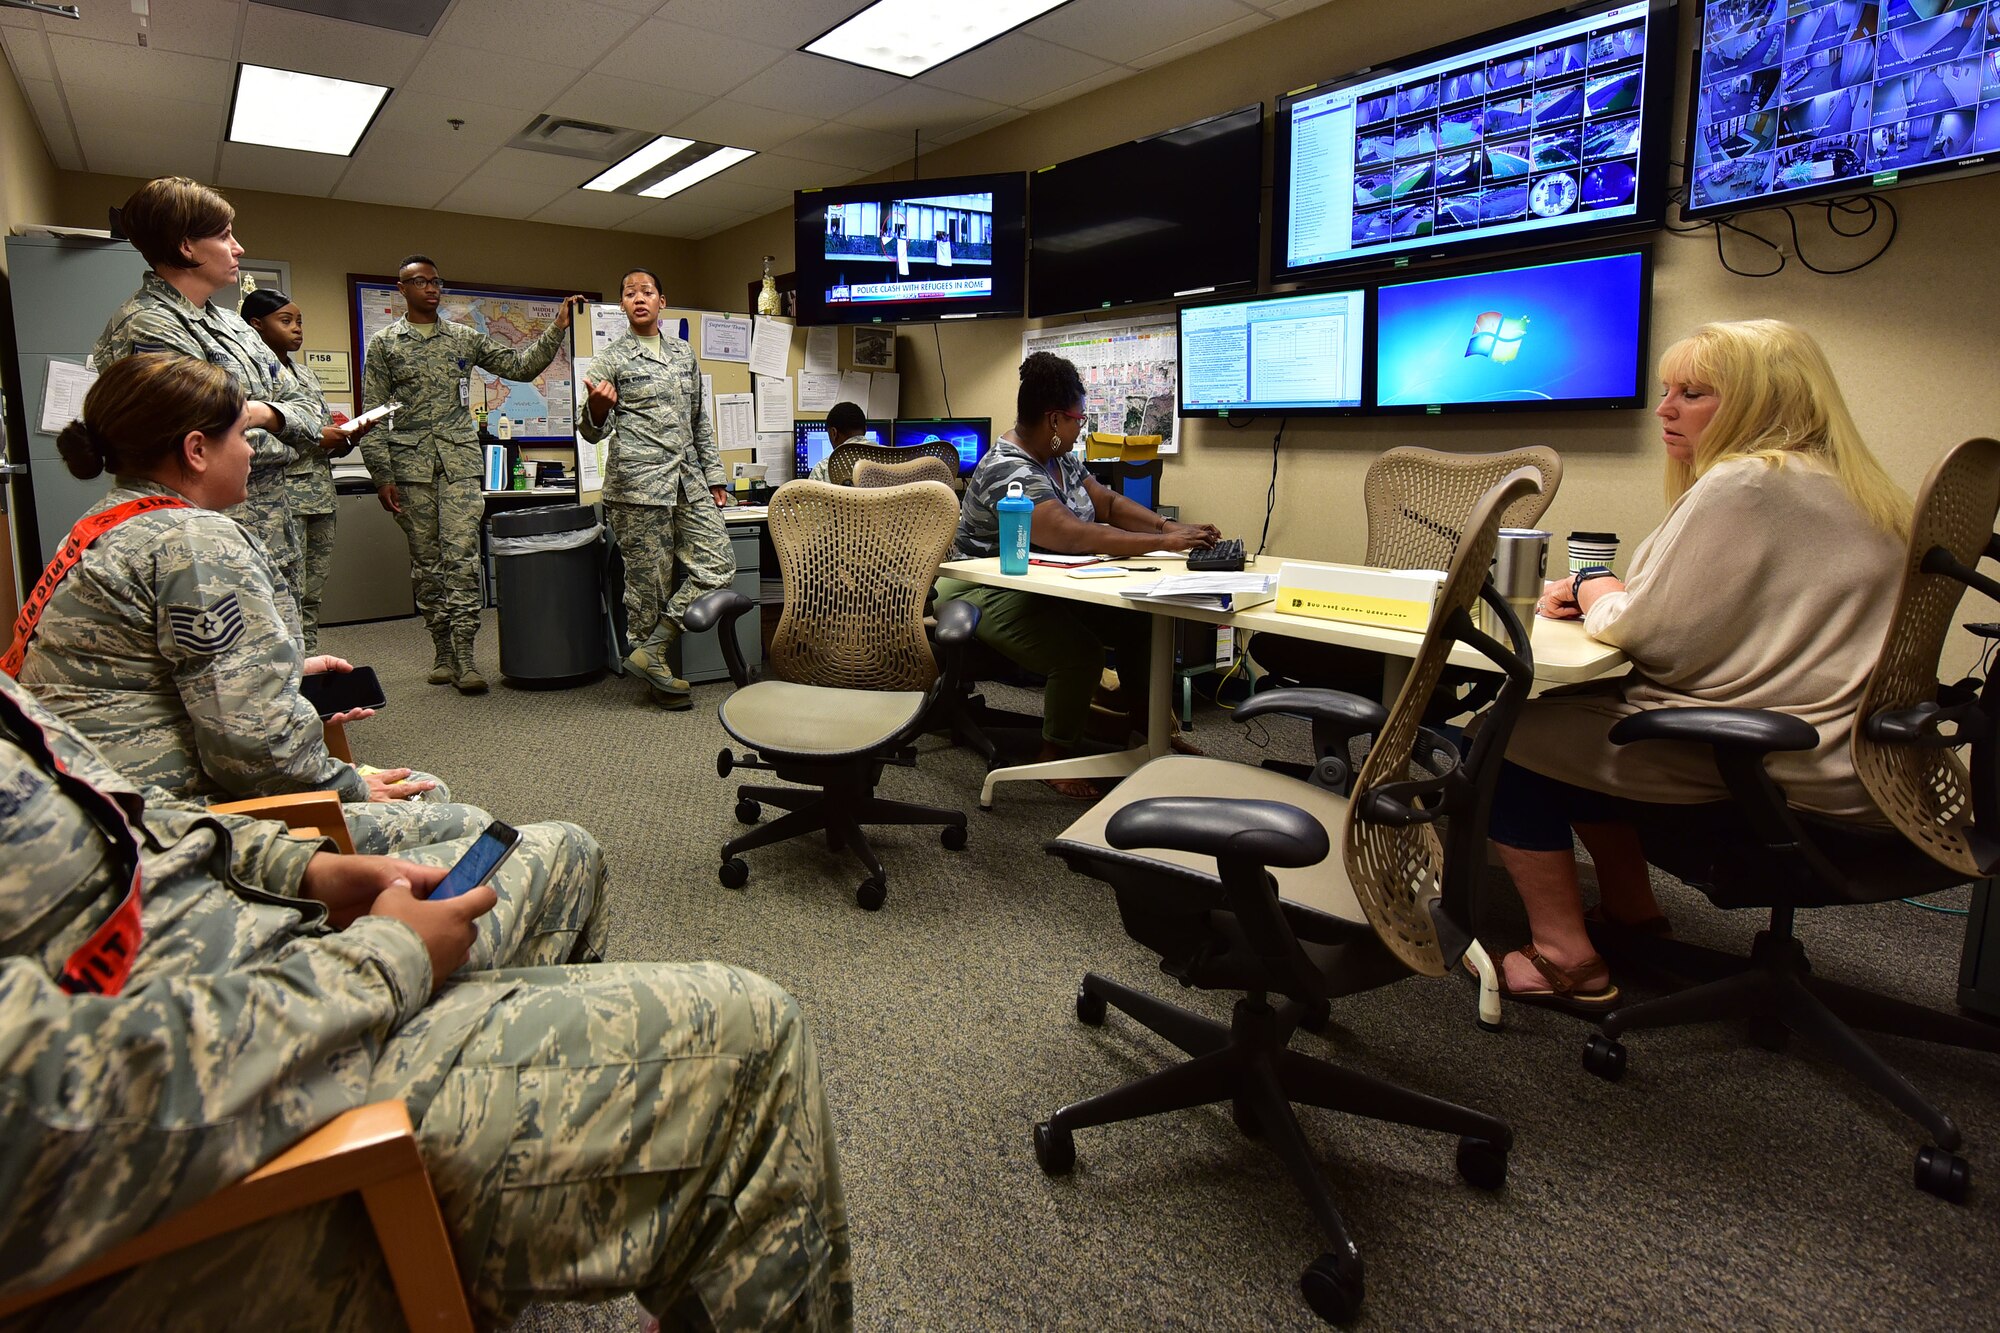 1st Lt. Hershall Gaffney Witherspoon, 19th Medical Support Squadron medical readiness flight commander, briefs the Medical Control Center, or MCC, on the current situation of an exercise underway August 24, 2017 at Little Rock Air Force Base, Ark. The MCC is in charge of correlating the different aspects of the 19th Medical Group during times of crisis. (U.S. Air Force photo by Airmen Rhett Isbell)